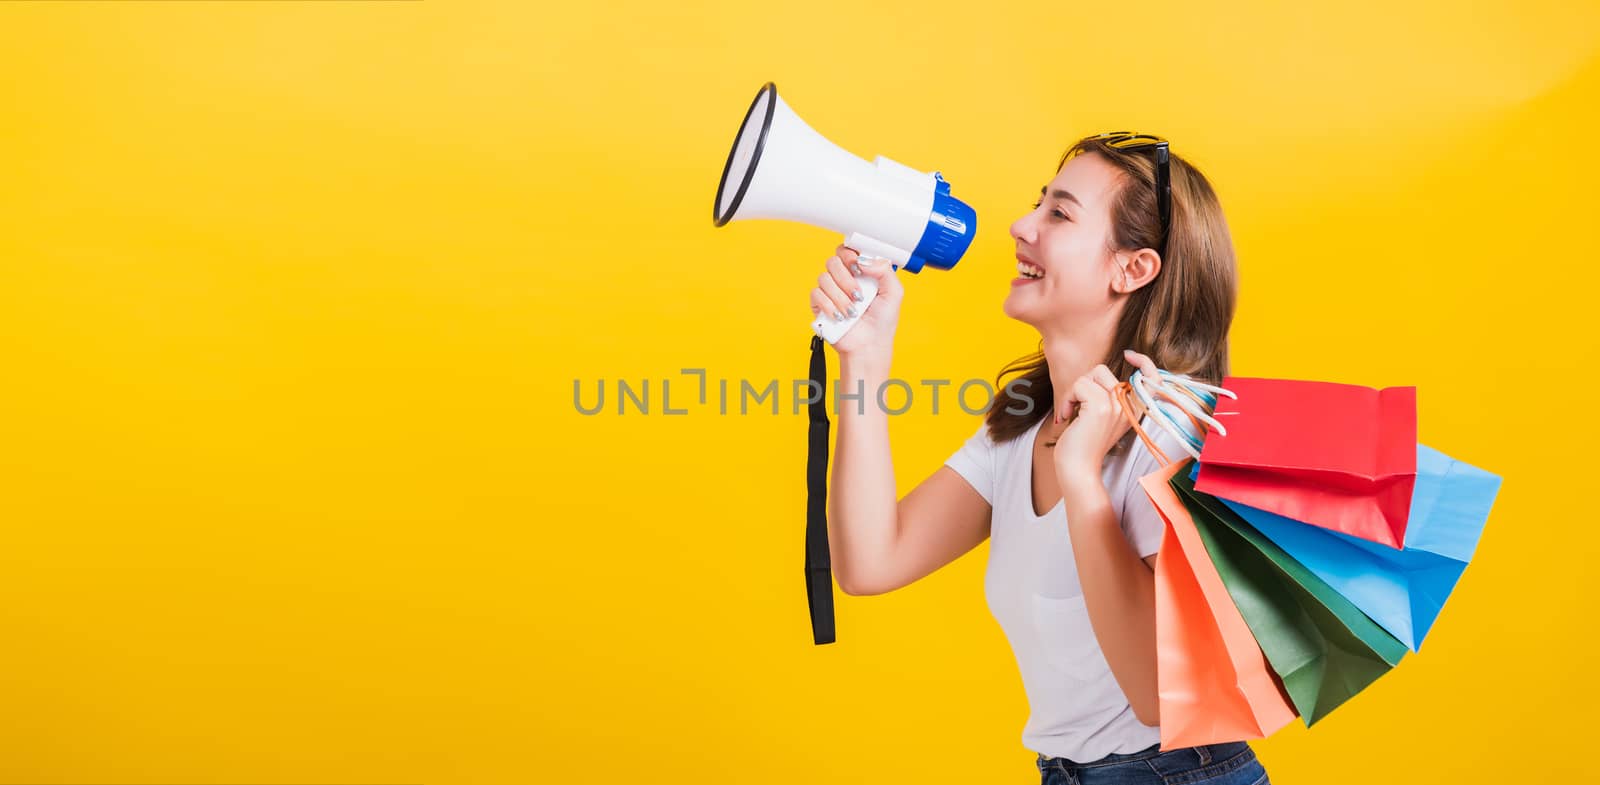 Portrait Asian Thai beautiful happy young woman smiling hold shopping bags multi-color and shouting in megaphone her looking to side away, studio shot isolated on yellow background, with copy space